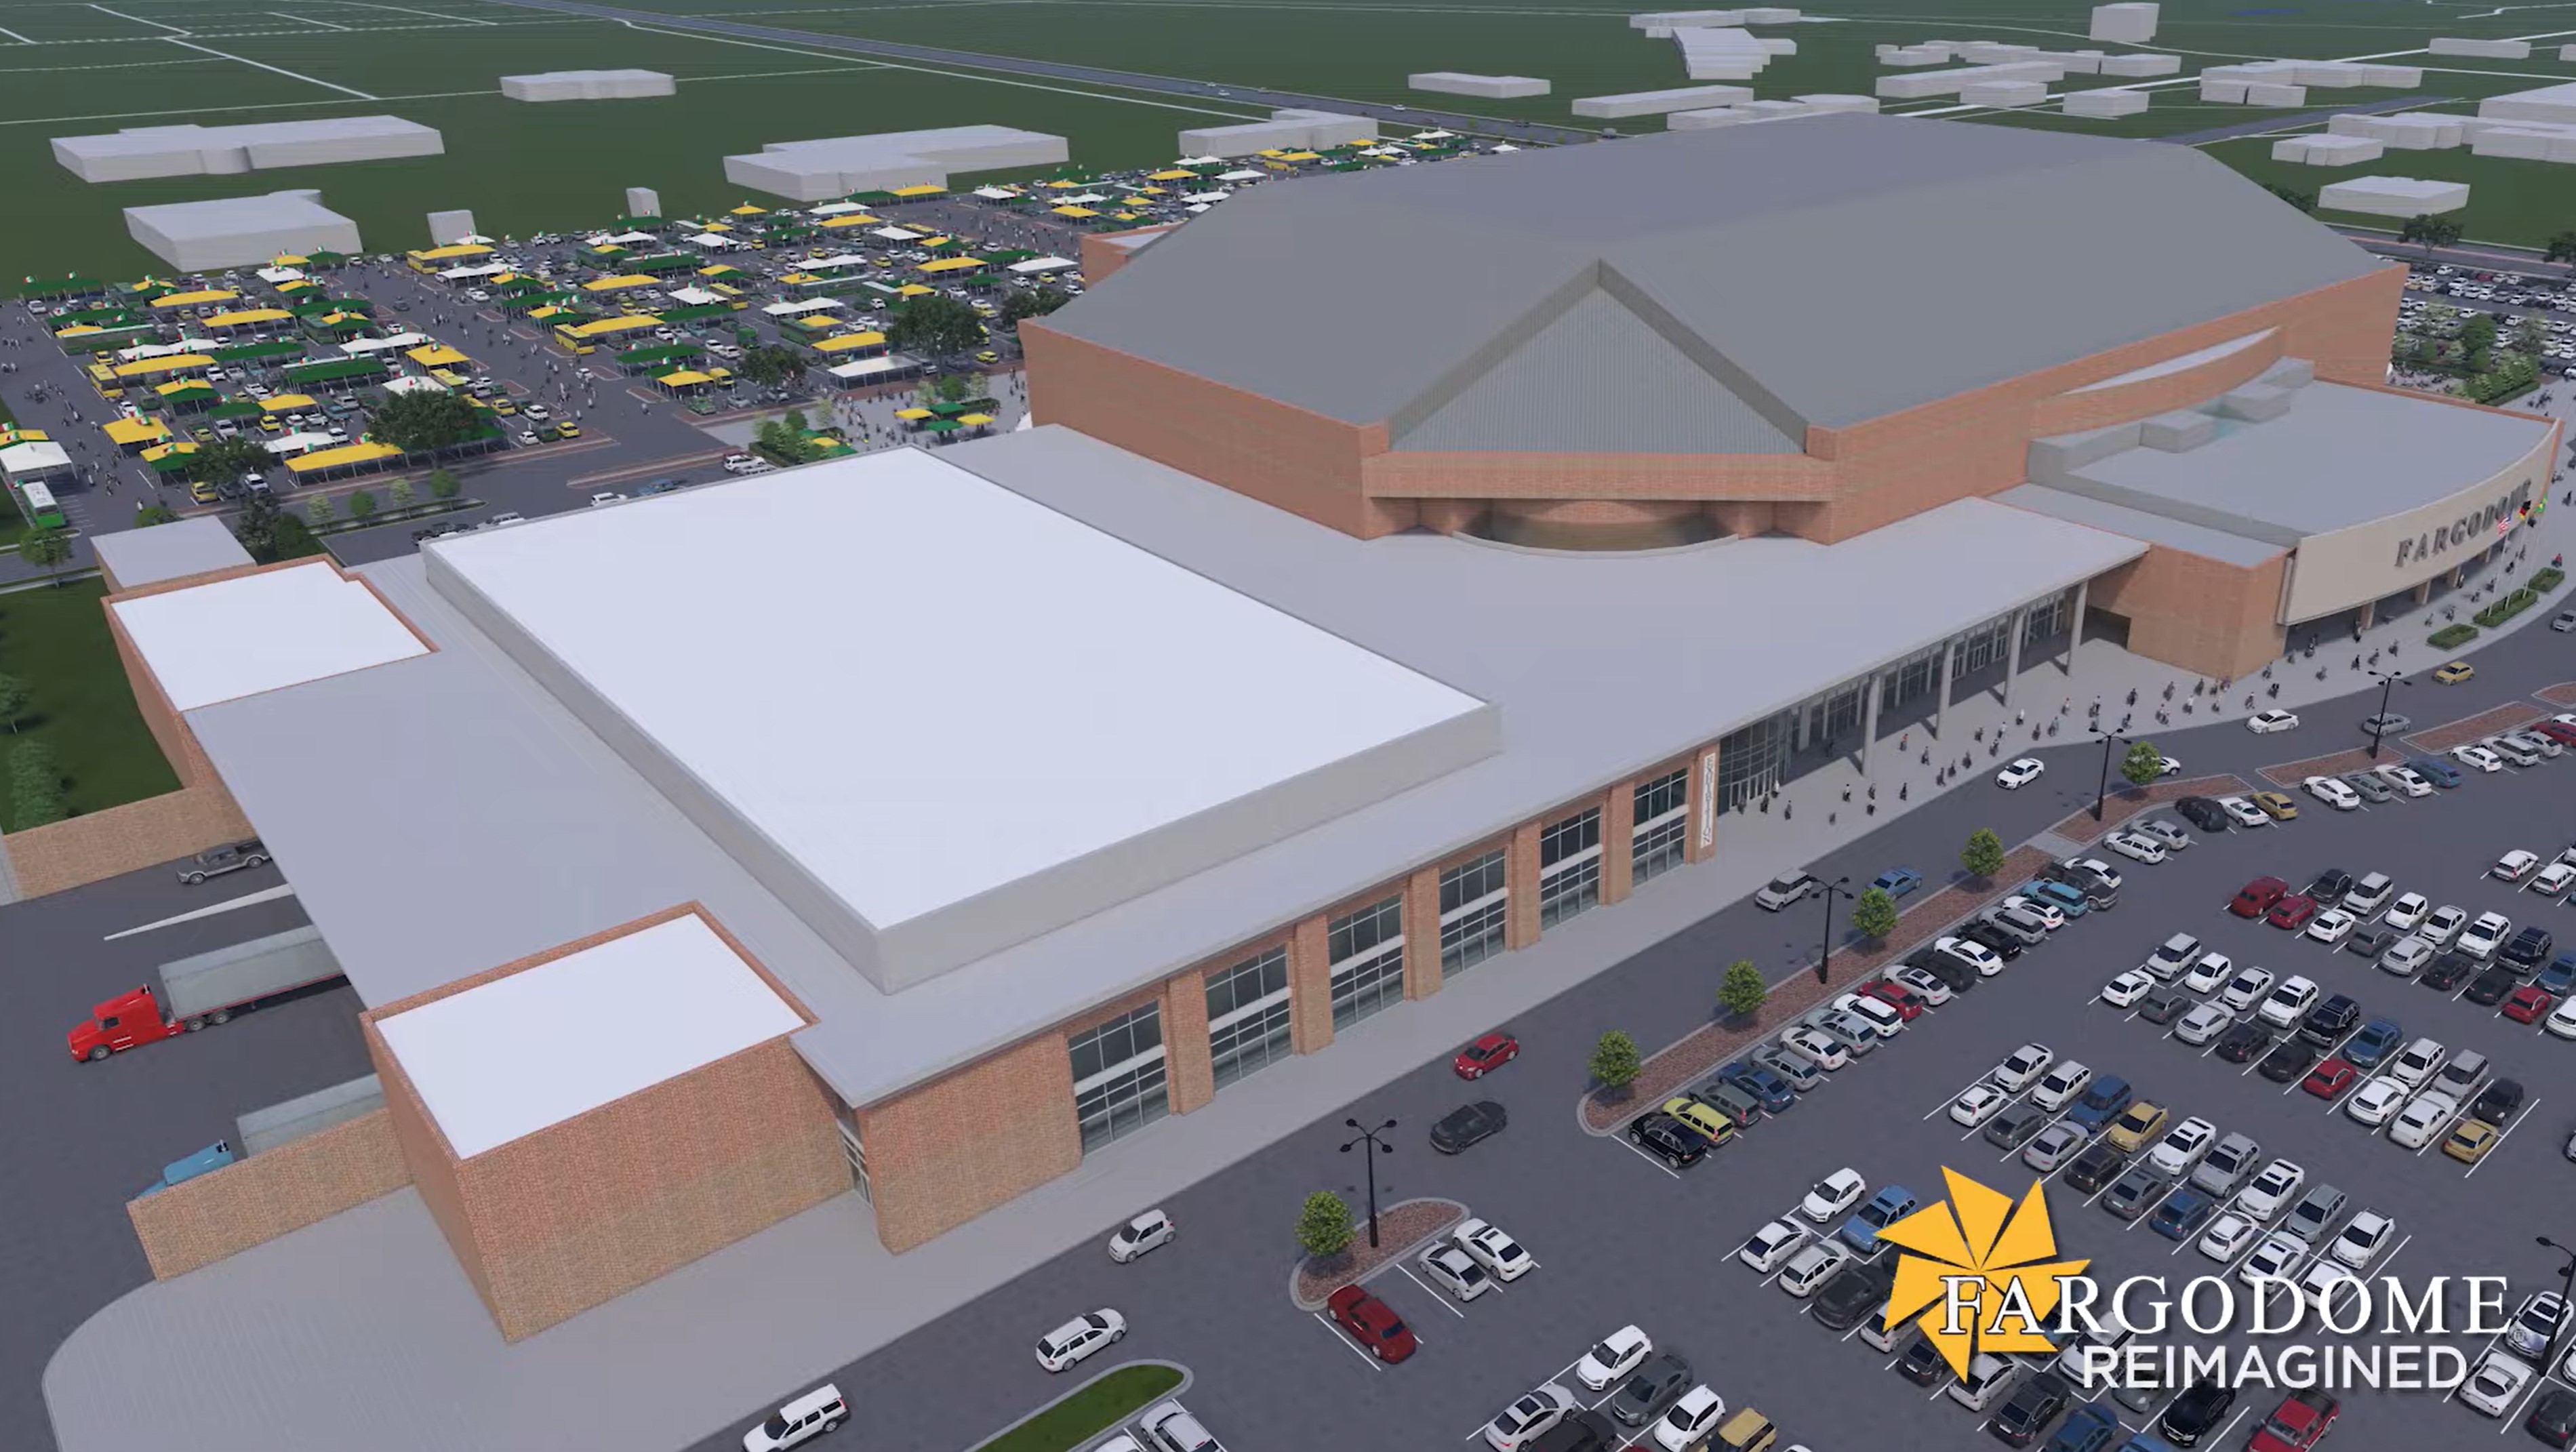 FMWF Chamber to discuss FARGODOME expansion at October 3 Eggs & Issues event